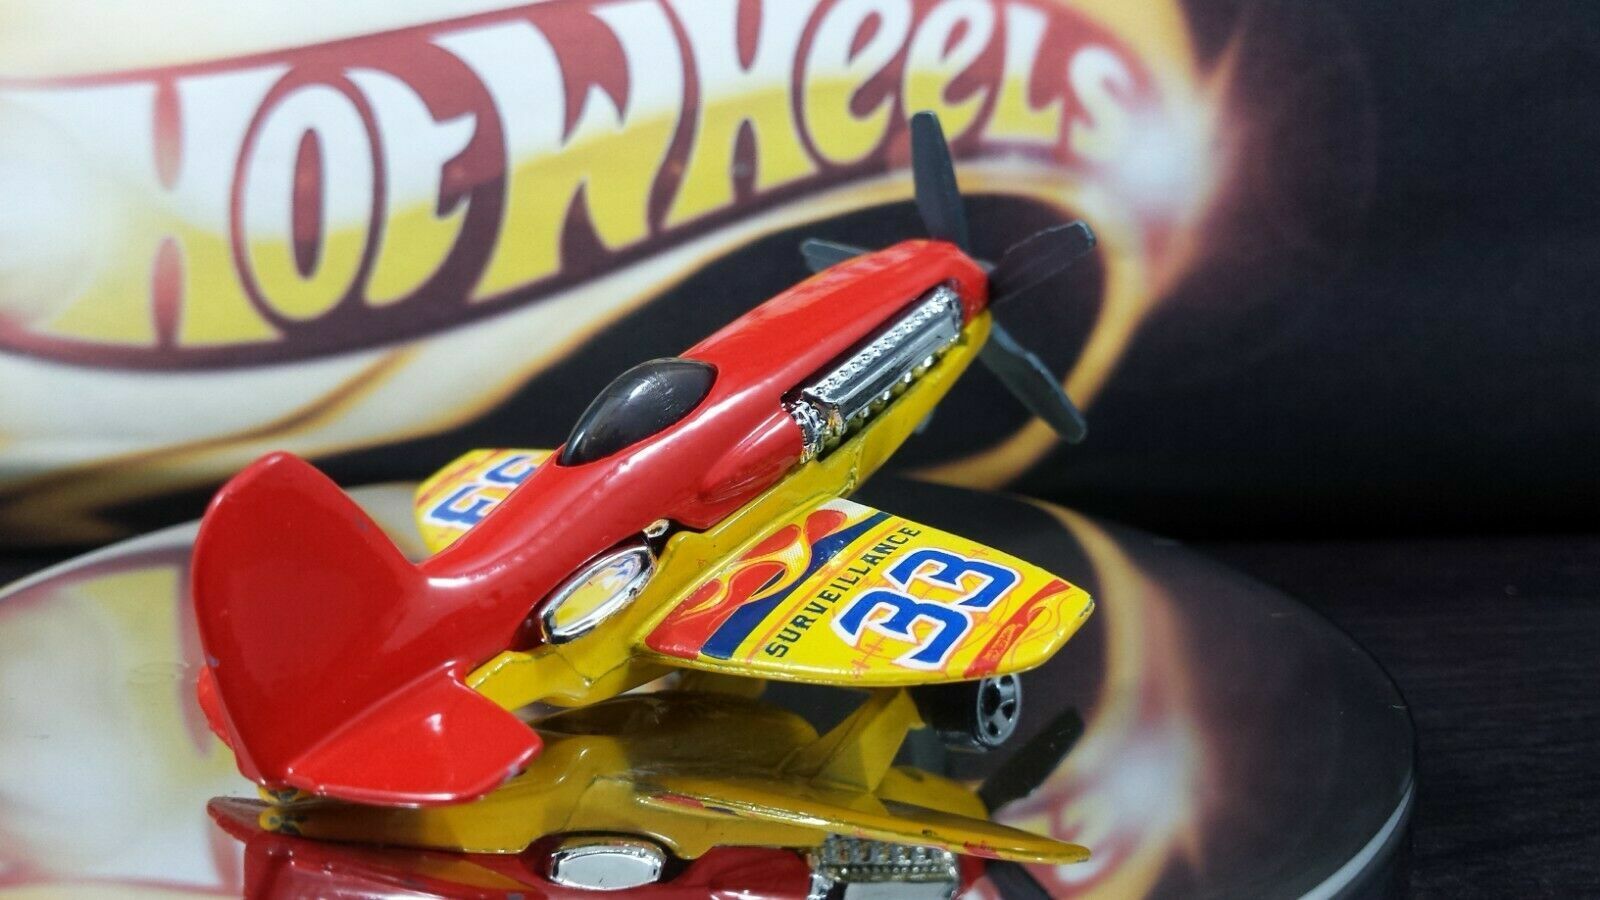 Hot Wheels Mad Propz Red Surveilance 33 Airplane Pilot 134/247 Toy Plane 2012